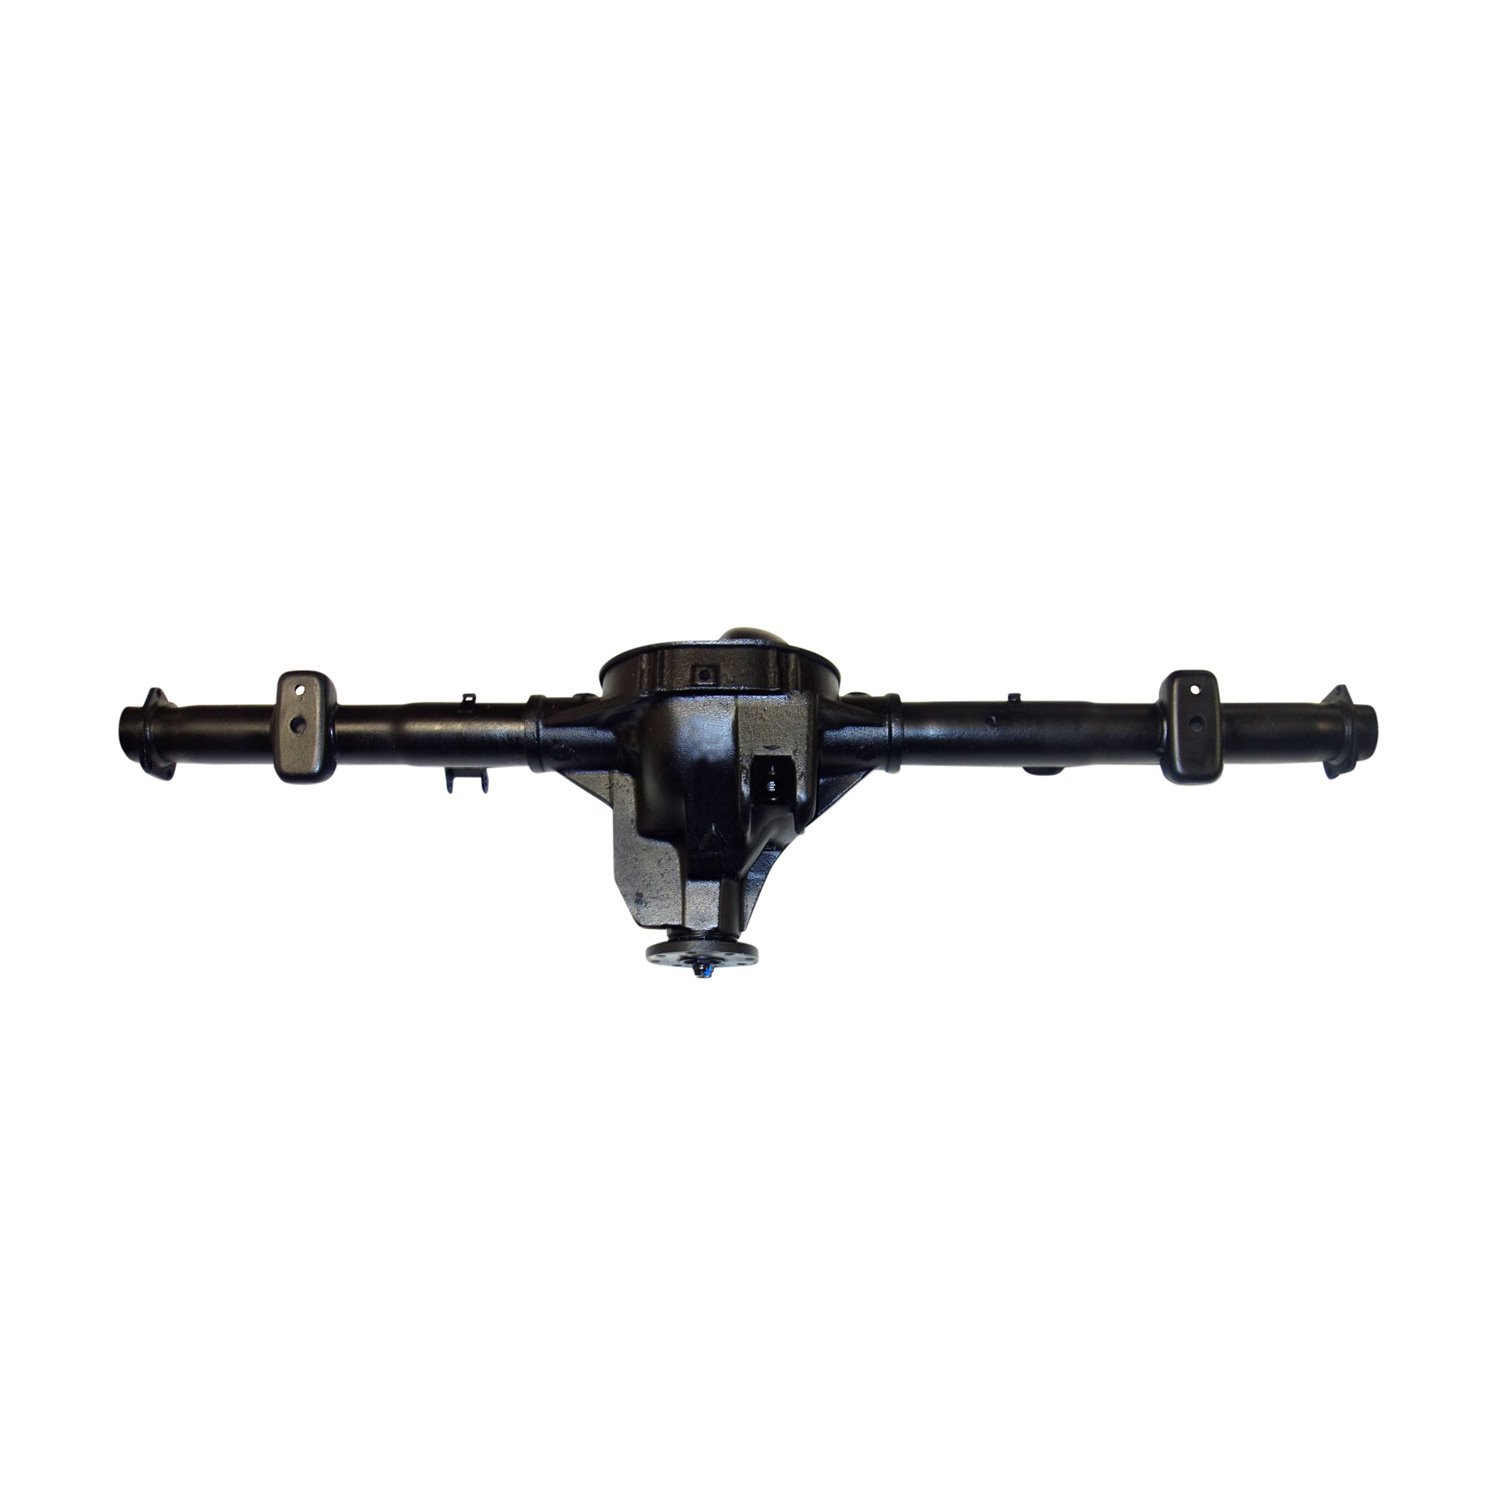 Remanufactured Complete Axle Assy for 8.8" 91-94 & Mazda Explorer & Navajo 3.55 with ABS